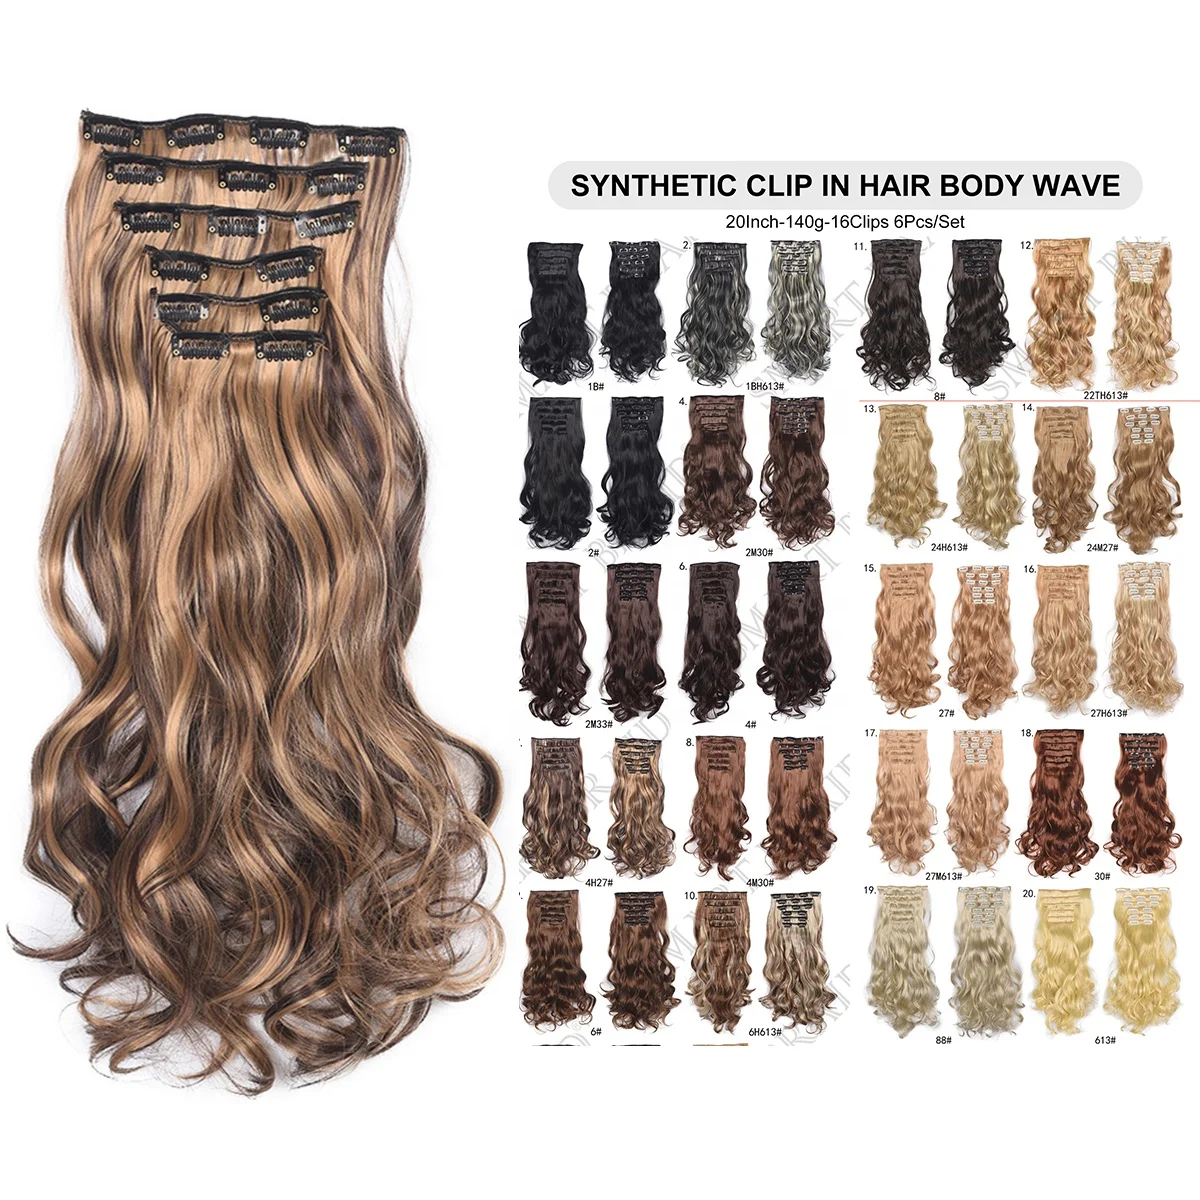 

Clip In Hair Extension 22"inch 140g Women's False Wavy Hairpiece 6pc/set Synthetic Curly Full Hair Set Heat Resistant